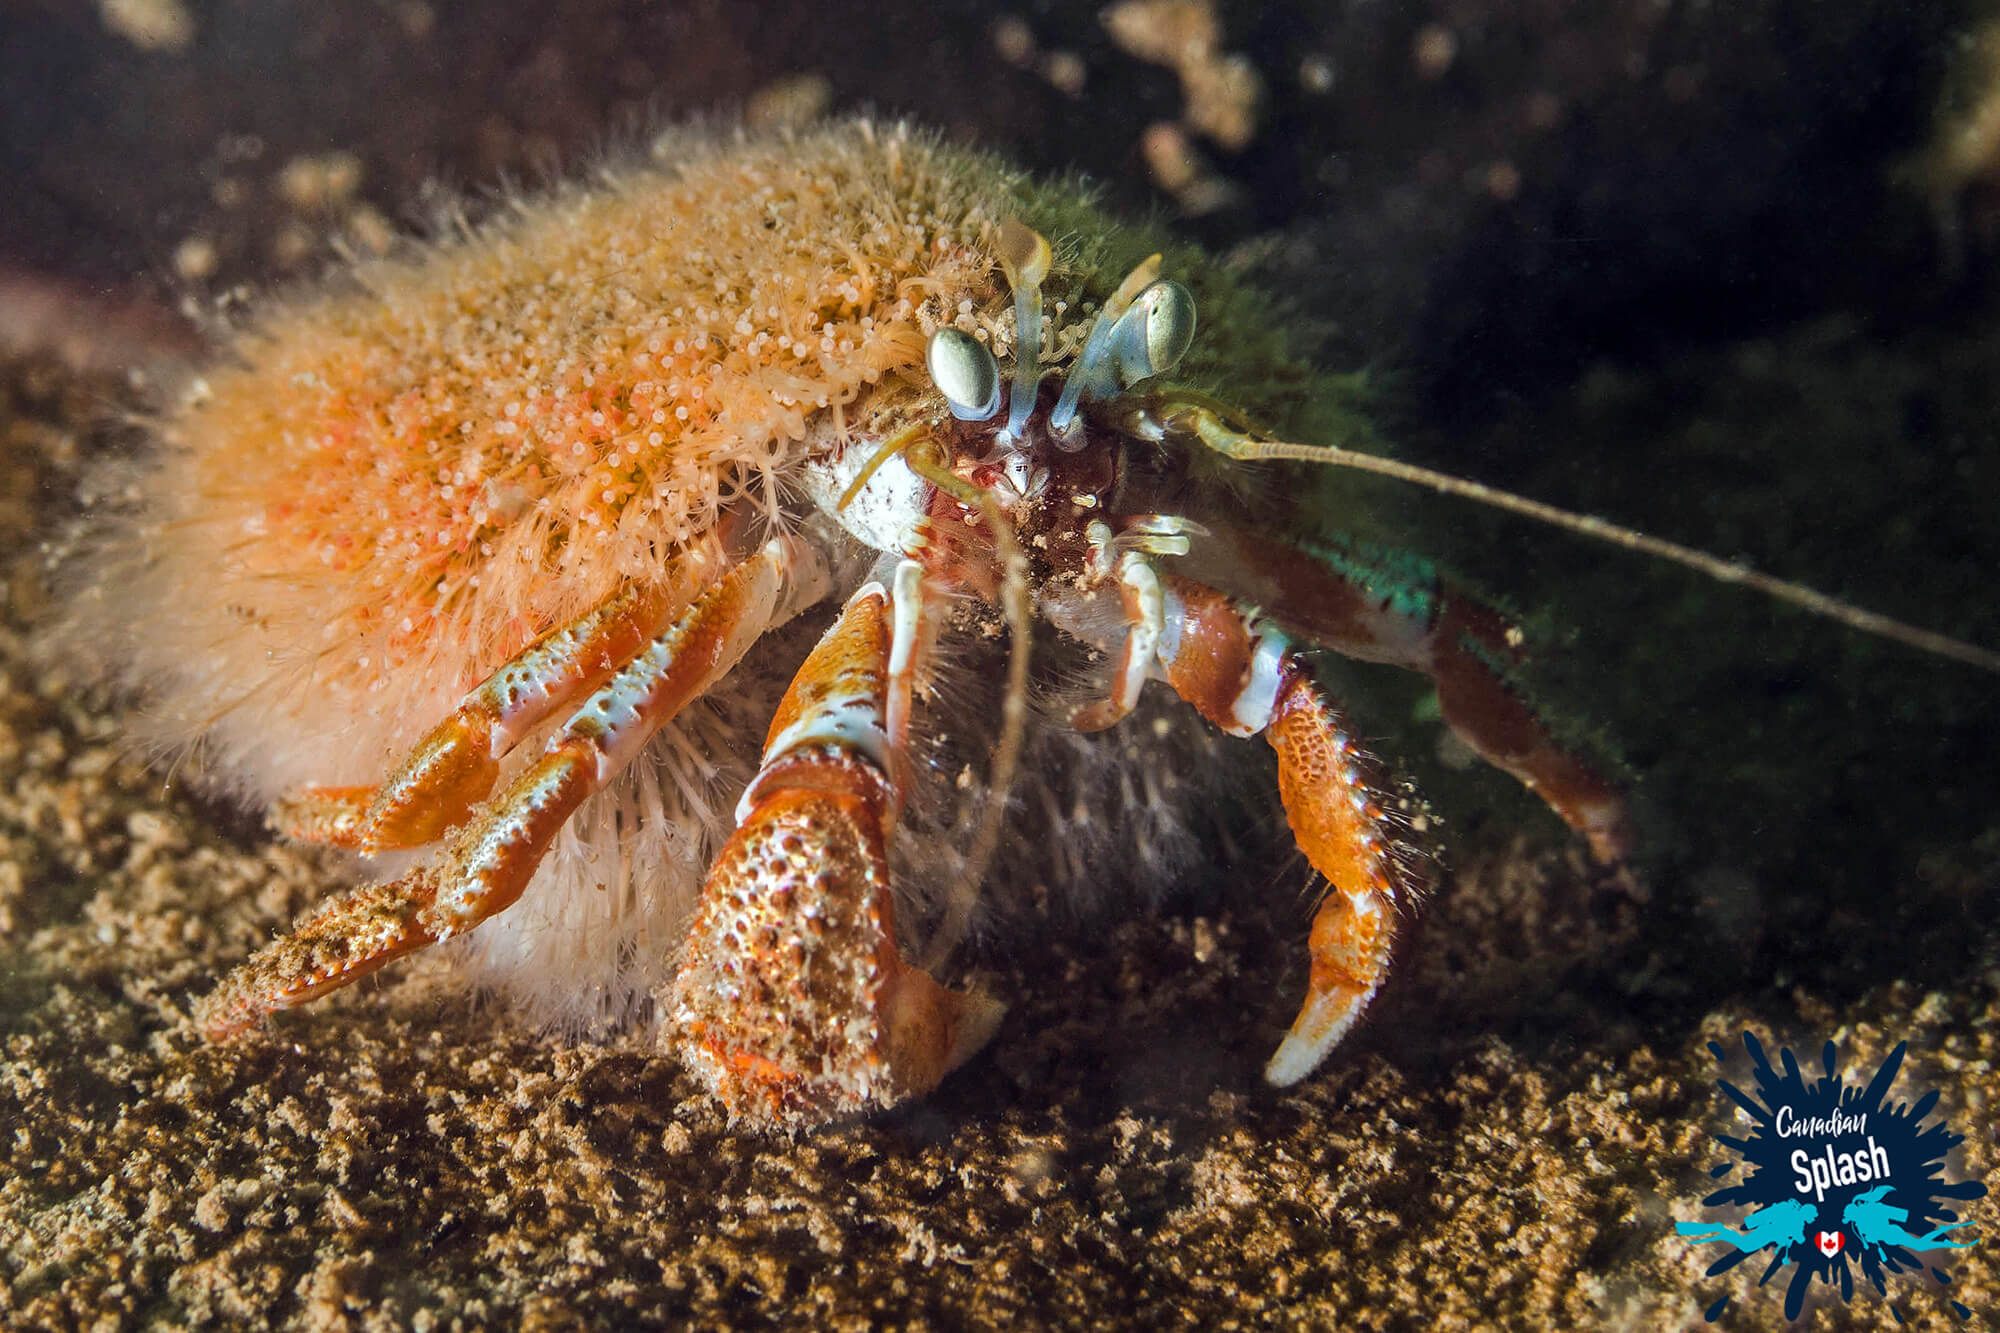 A Hermit Crab In The Bay Of Fundy With Pink Hydroids On His Shell, Saint John, New Brunswick, Canada